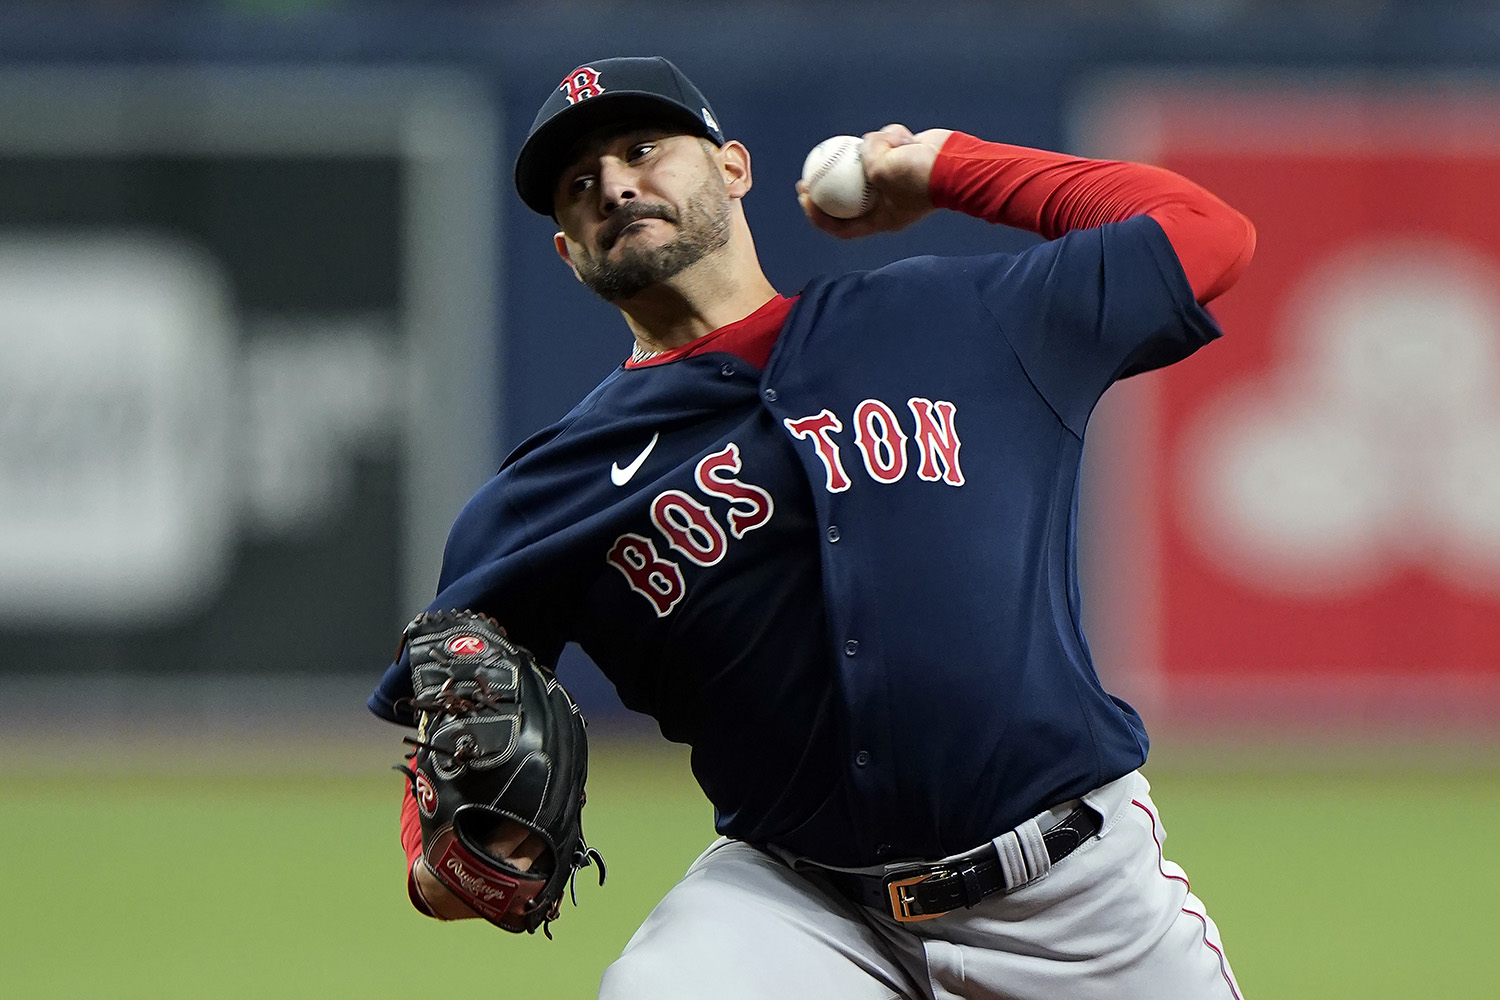 Red Sox Kike Hernandez tests positive for COVID-19, manager says